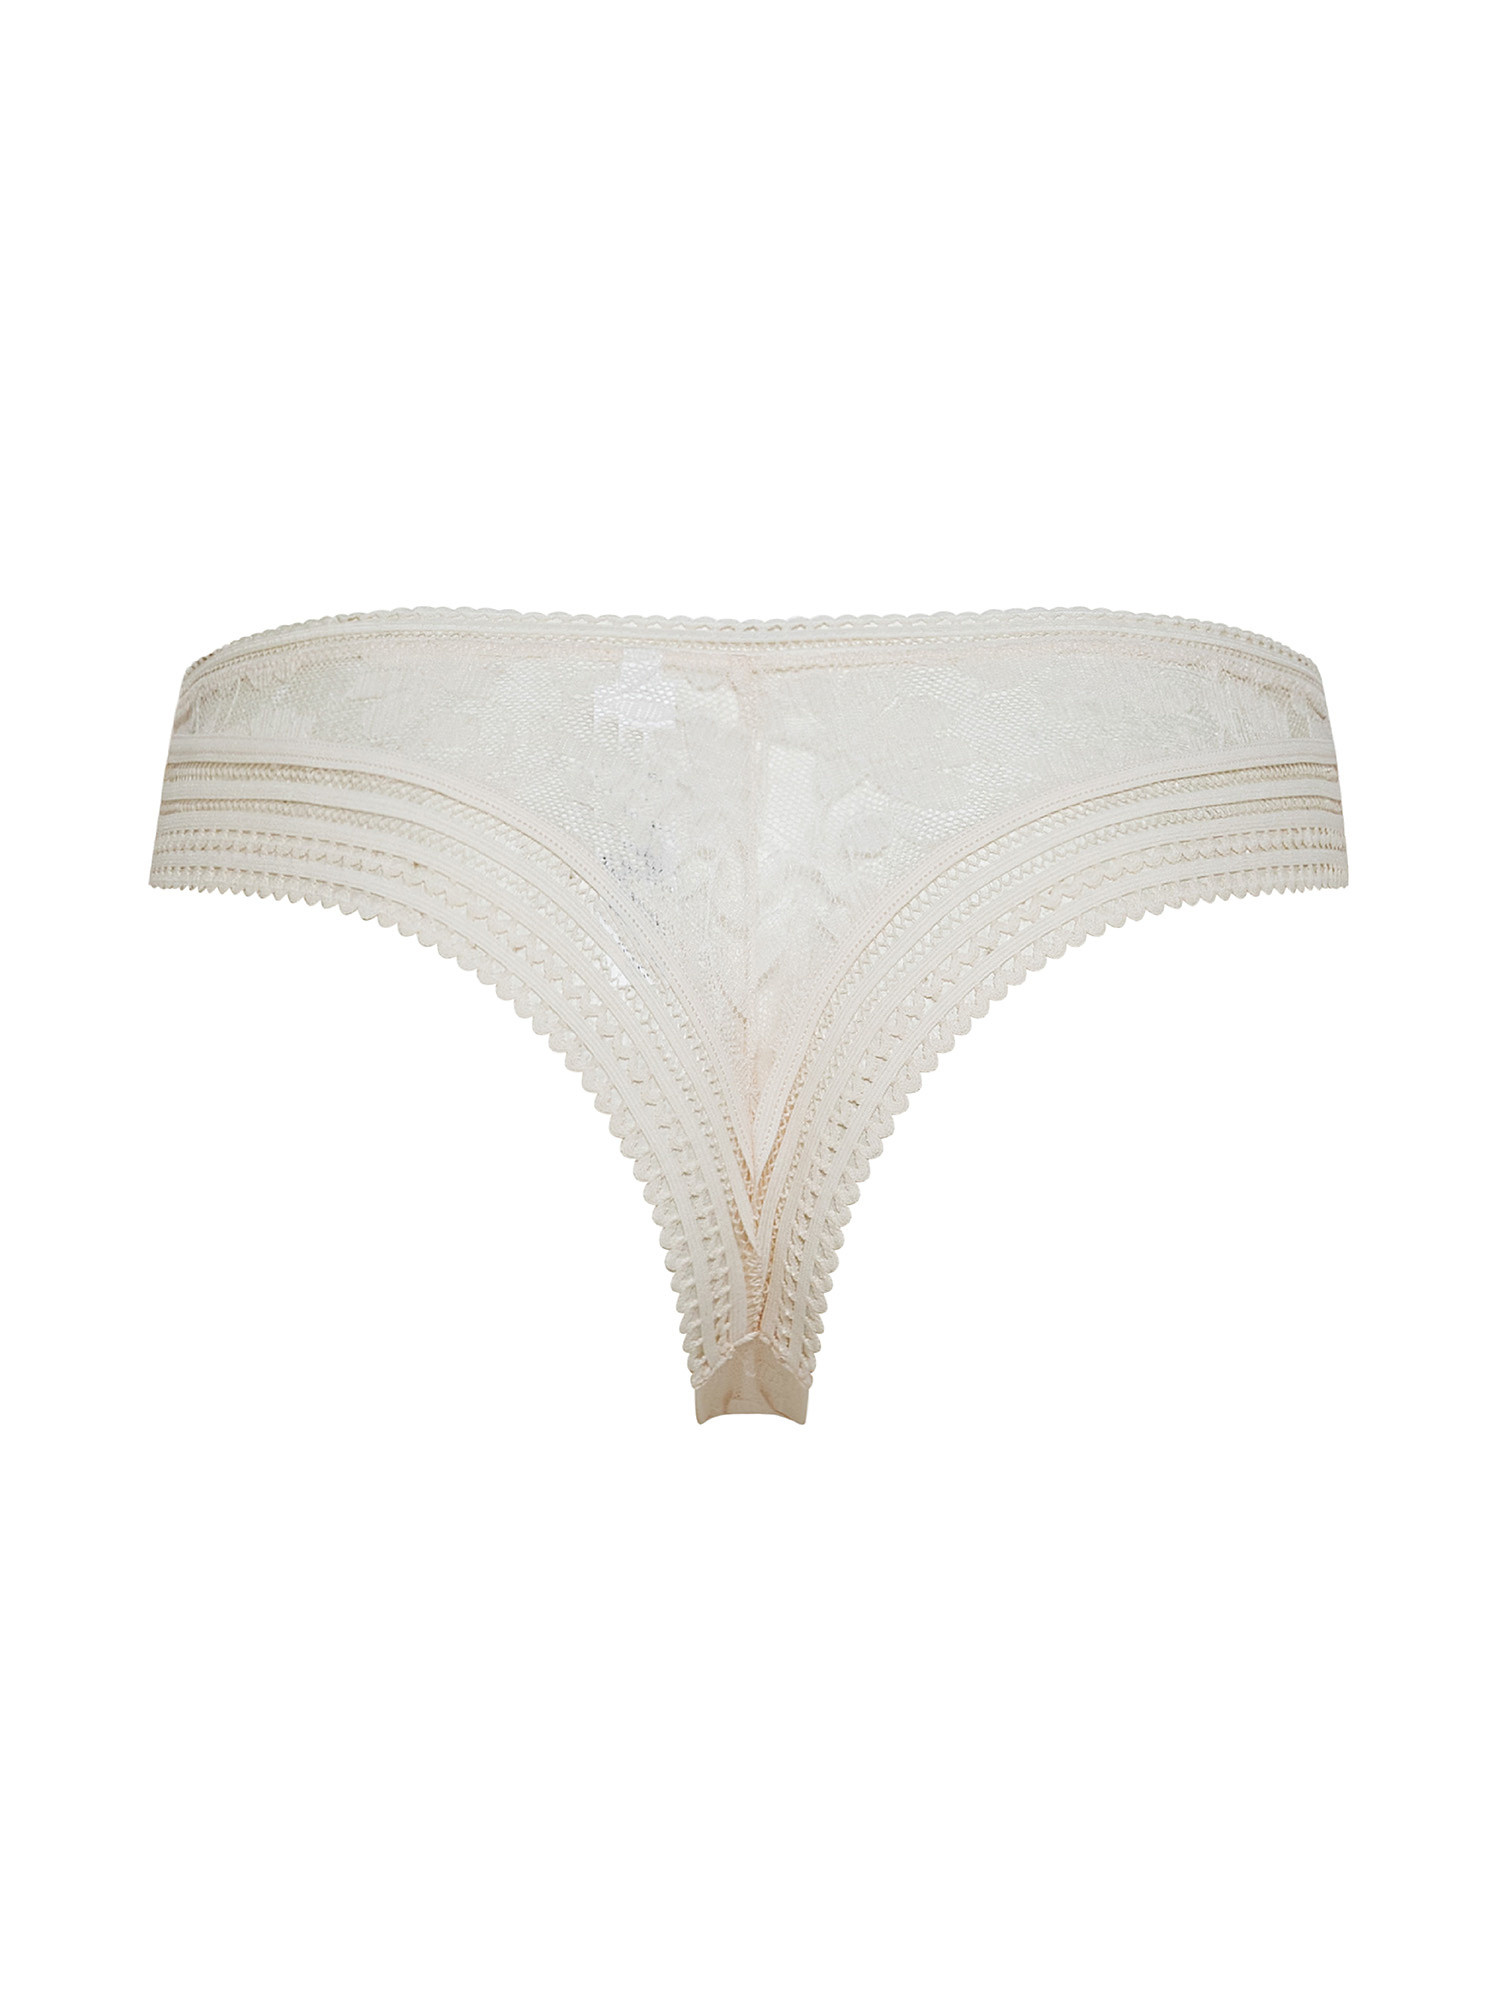 Lace thong, White Cream, large image number 1